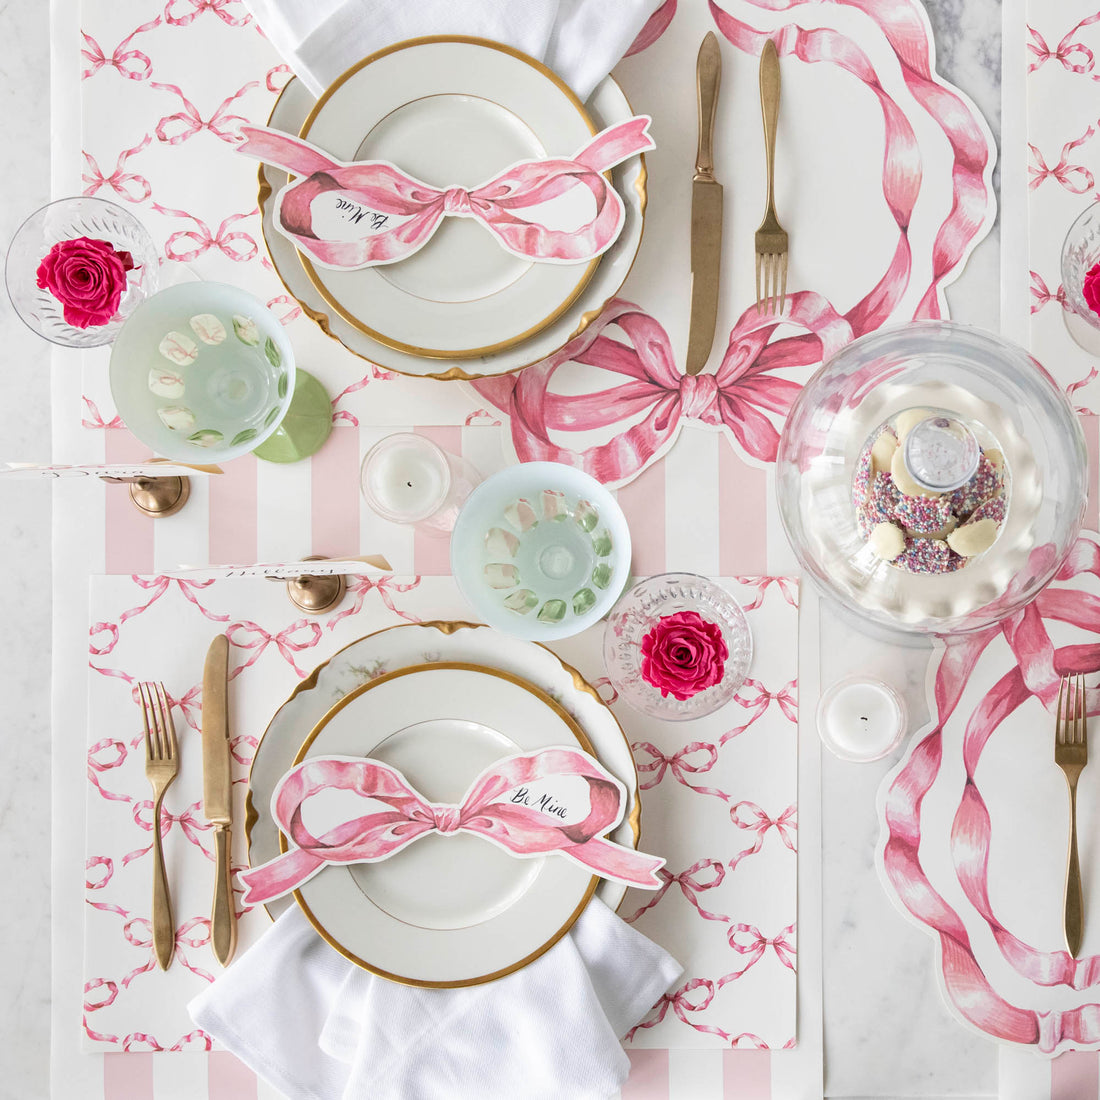 The Pink Bow Lattice Placemat under an elegant table setting, from above.